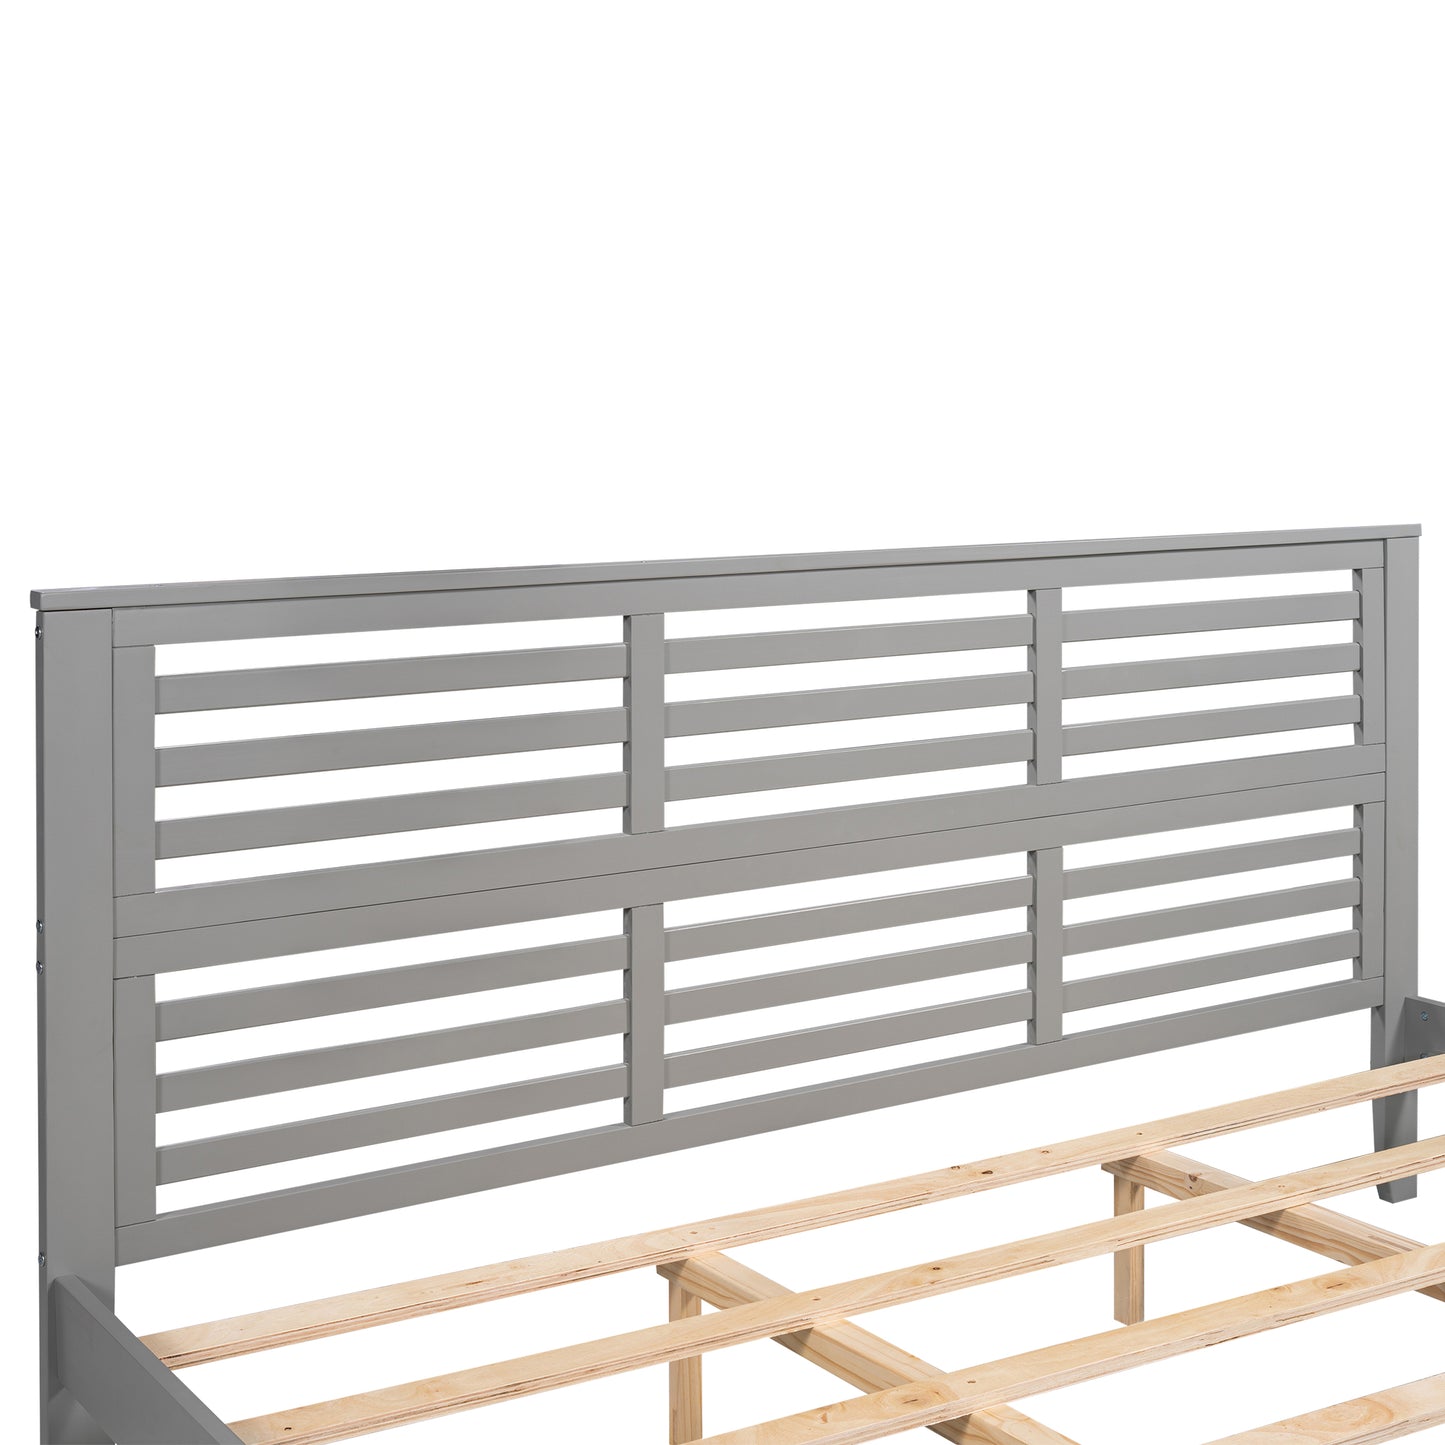 SYNGAR King Size Bed Frame with Headboard, Platform Bed Frame Solid Wood with Headboard, 500lbs Weight Capacity, Gray, LJ2093